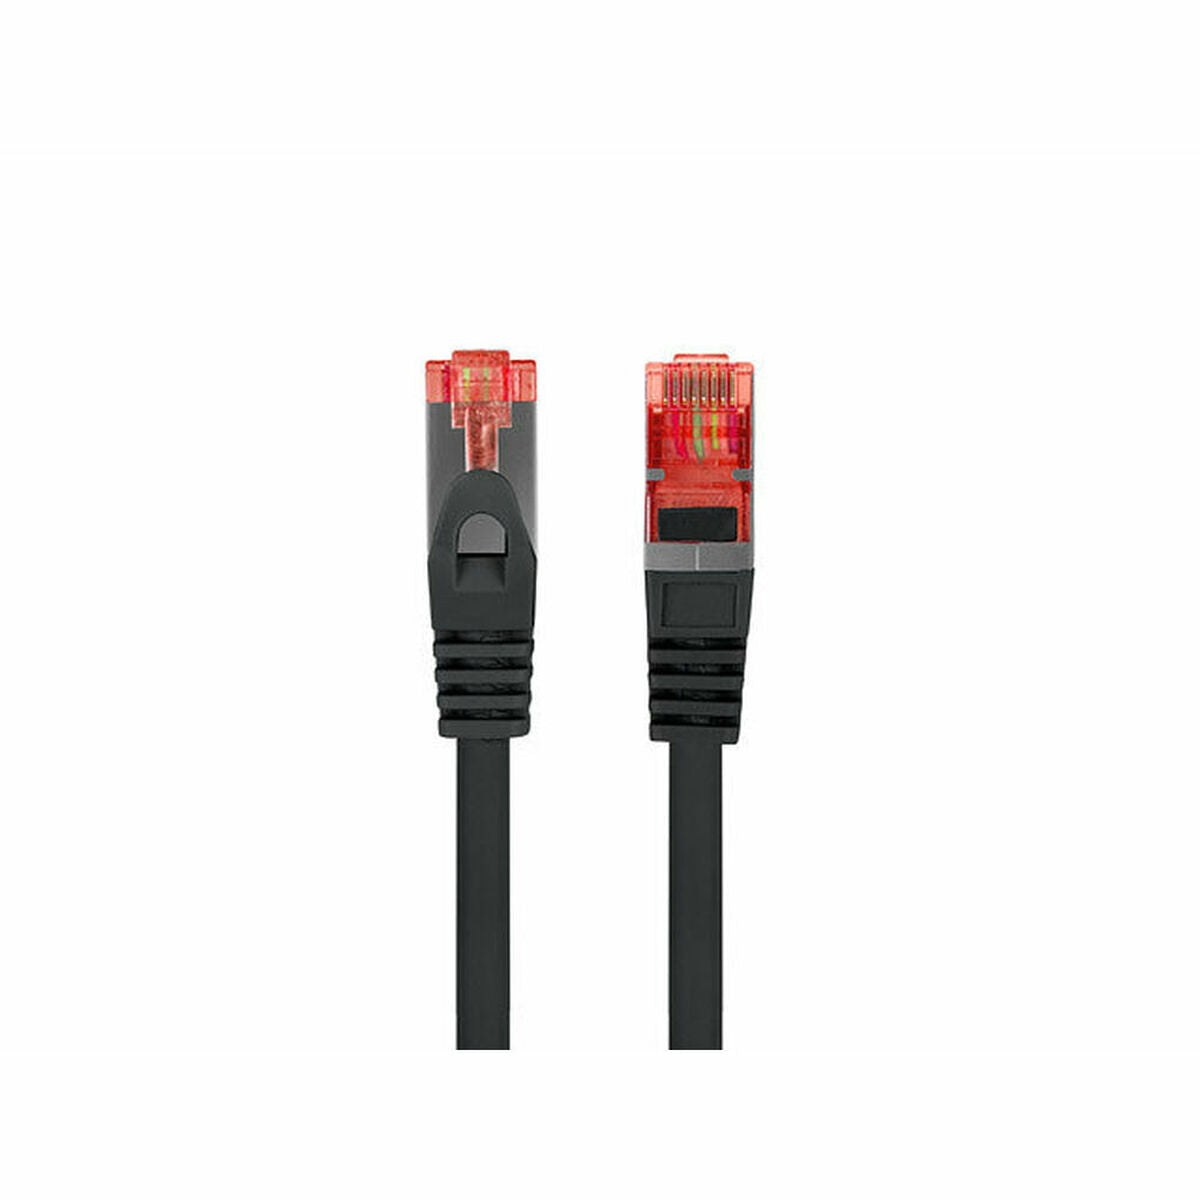 UTP Category 6 Rigid Network Cable Lanberg PCF6-10CU-0150-BK-0